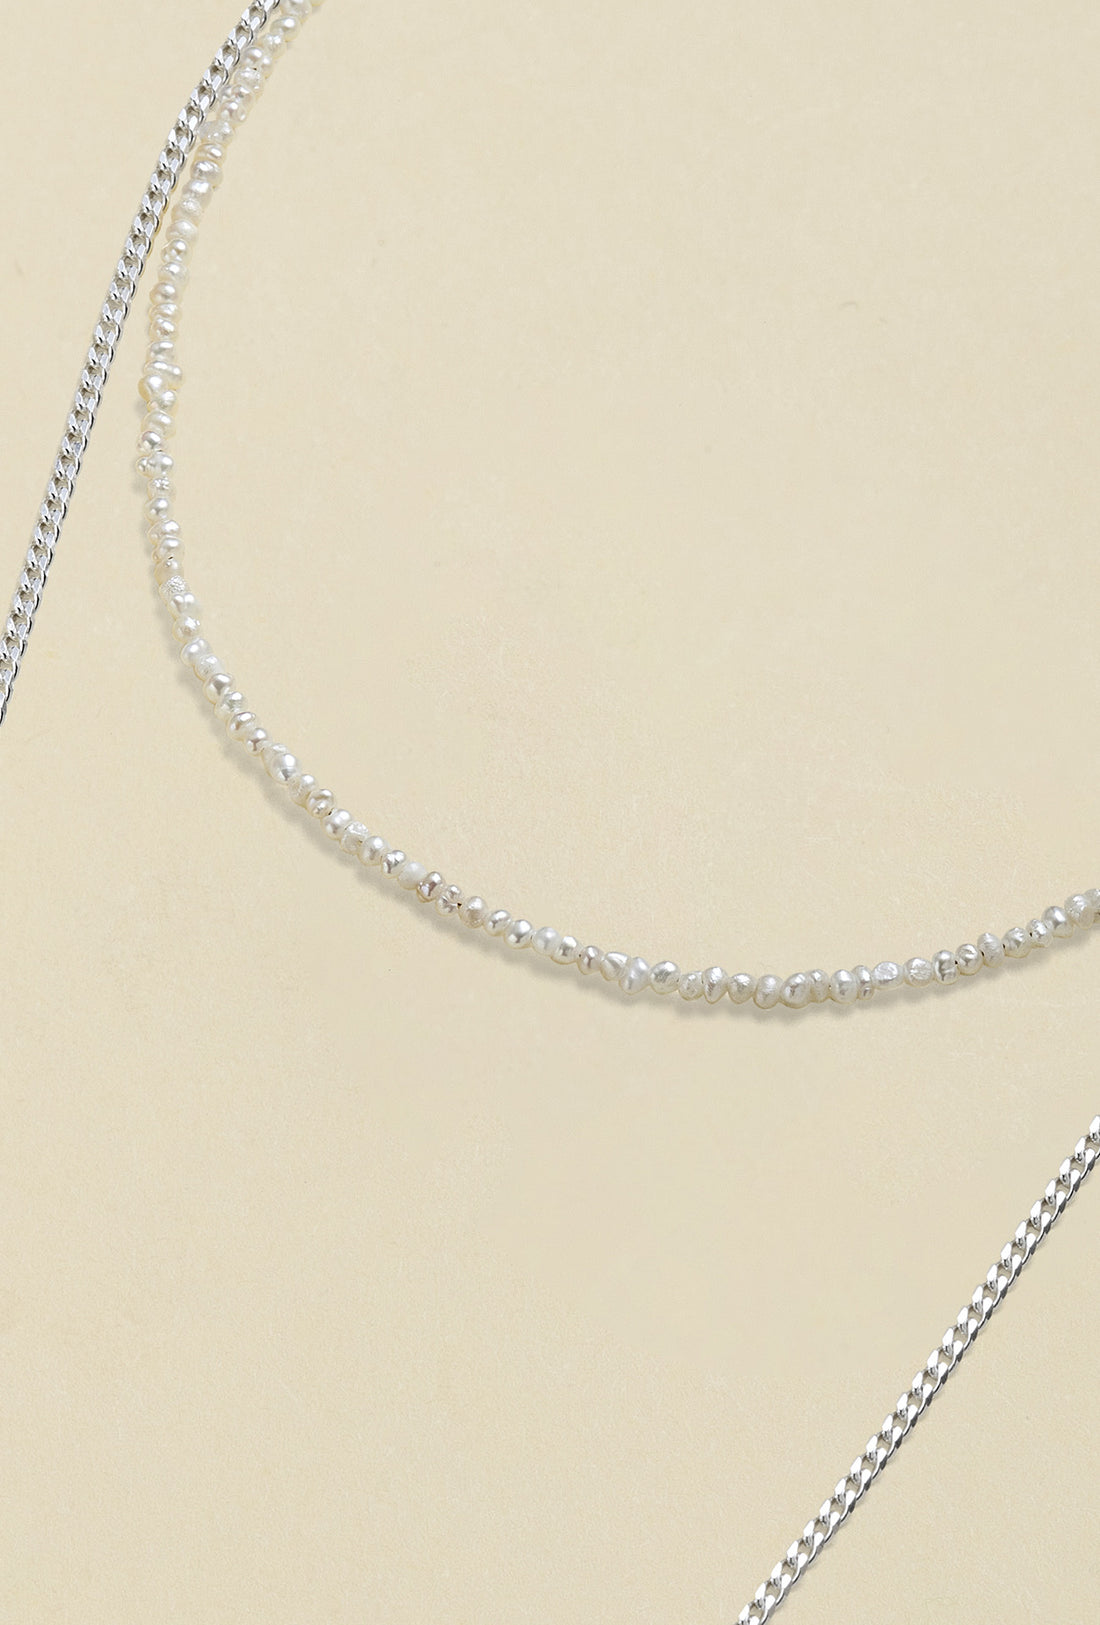 Silver and Pearl Necklace "Edge"